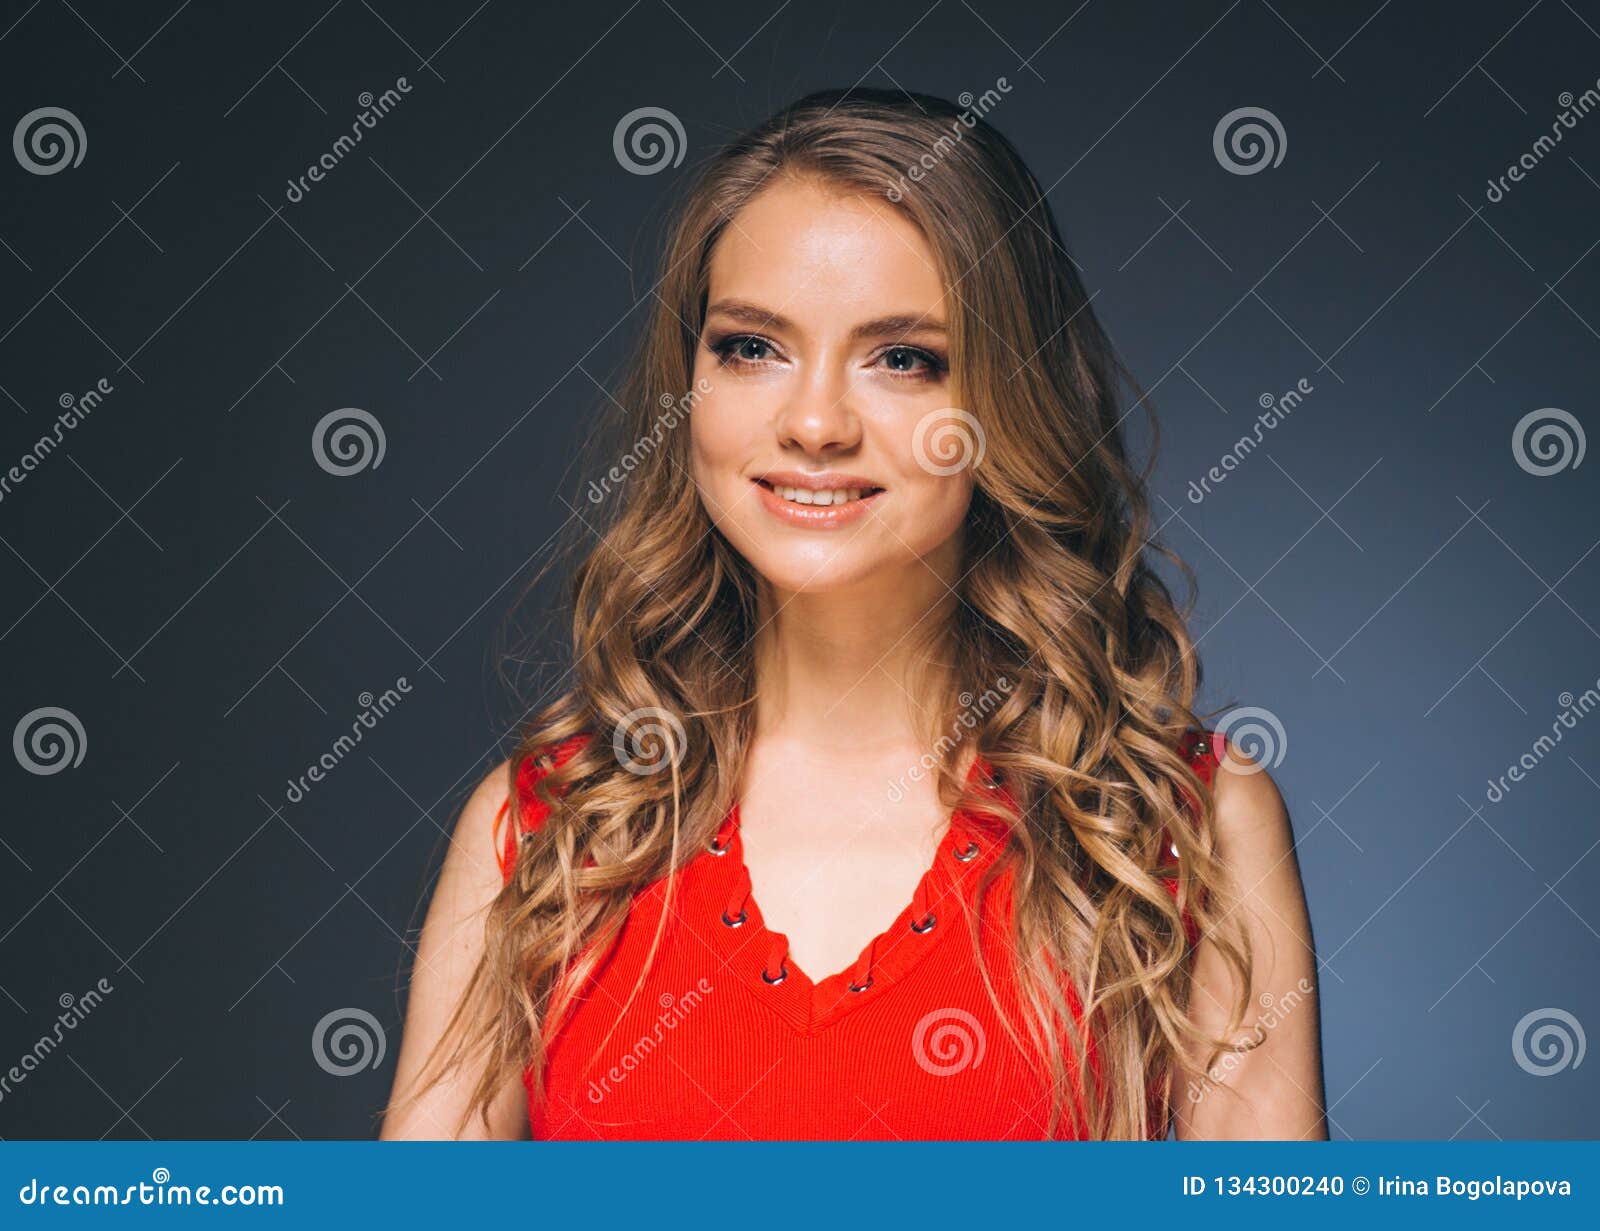 Woman in Red Dress with Long Blonde Hair Stock Photo - Image of elegant ...